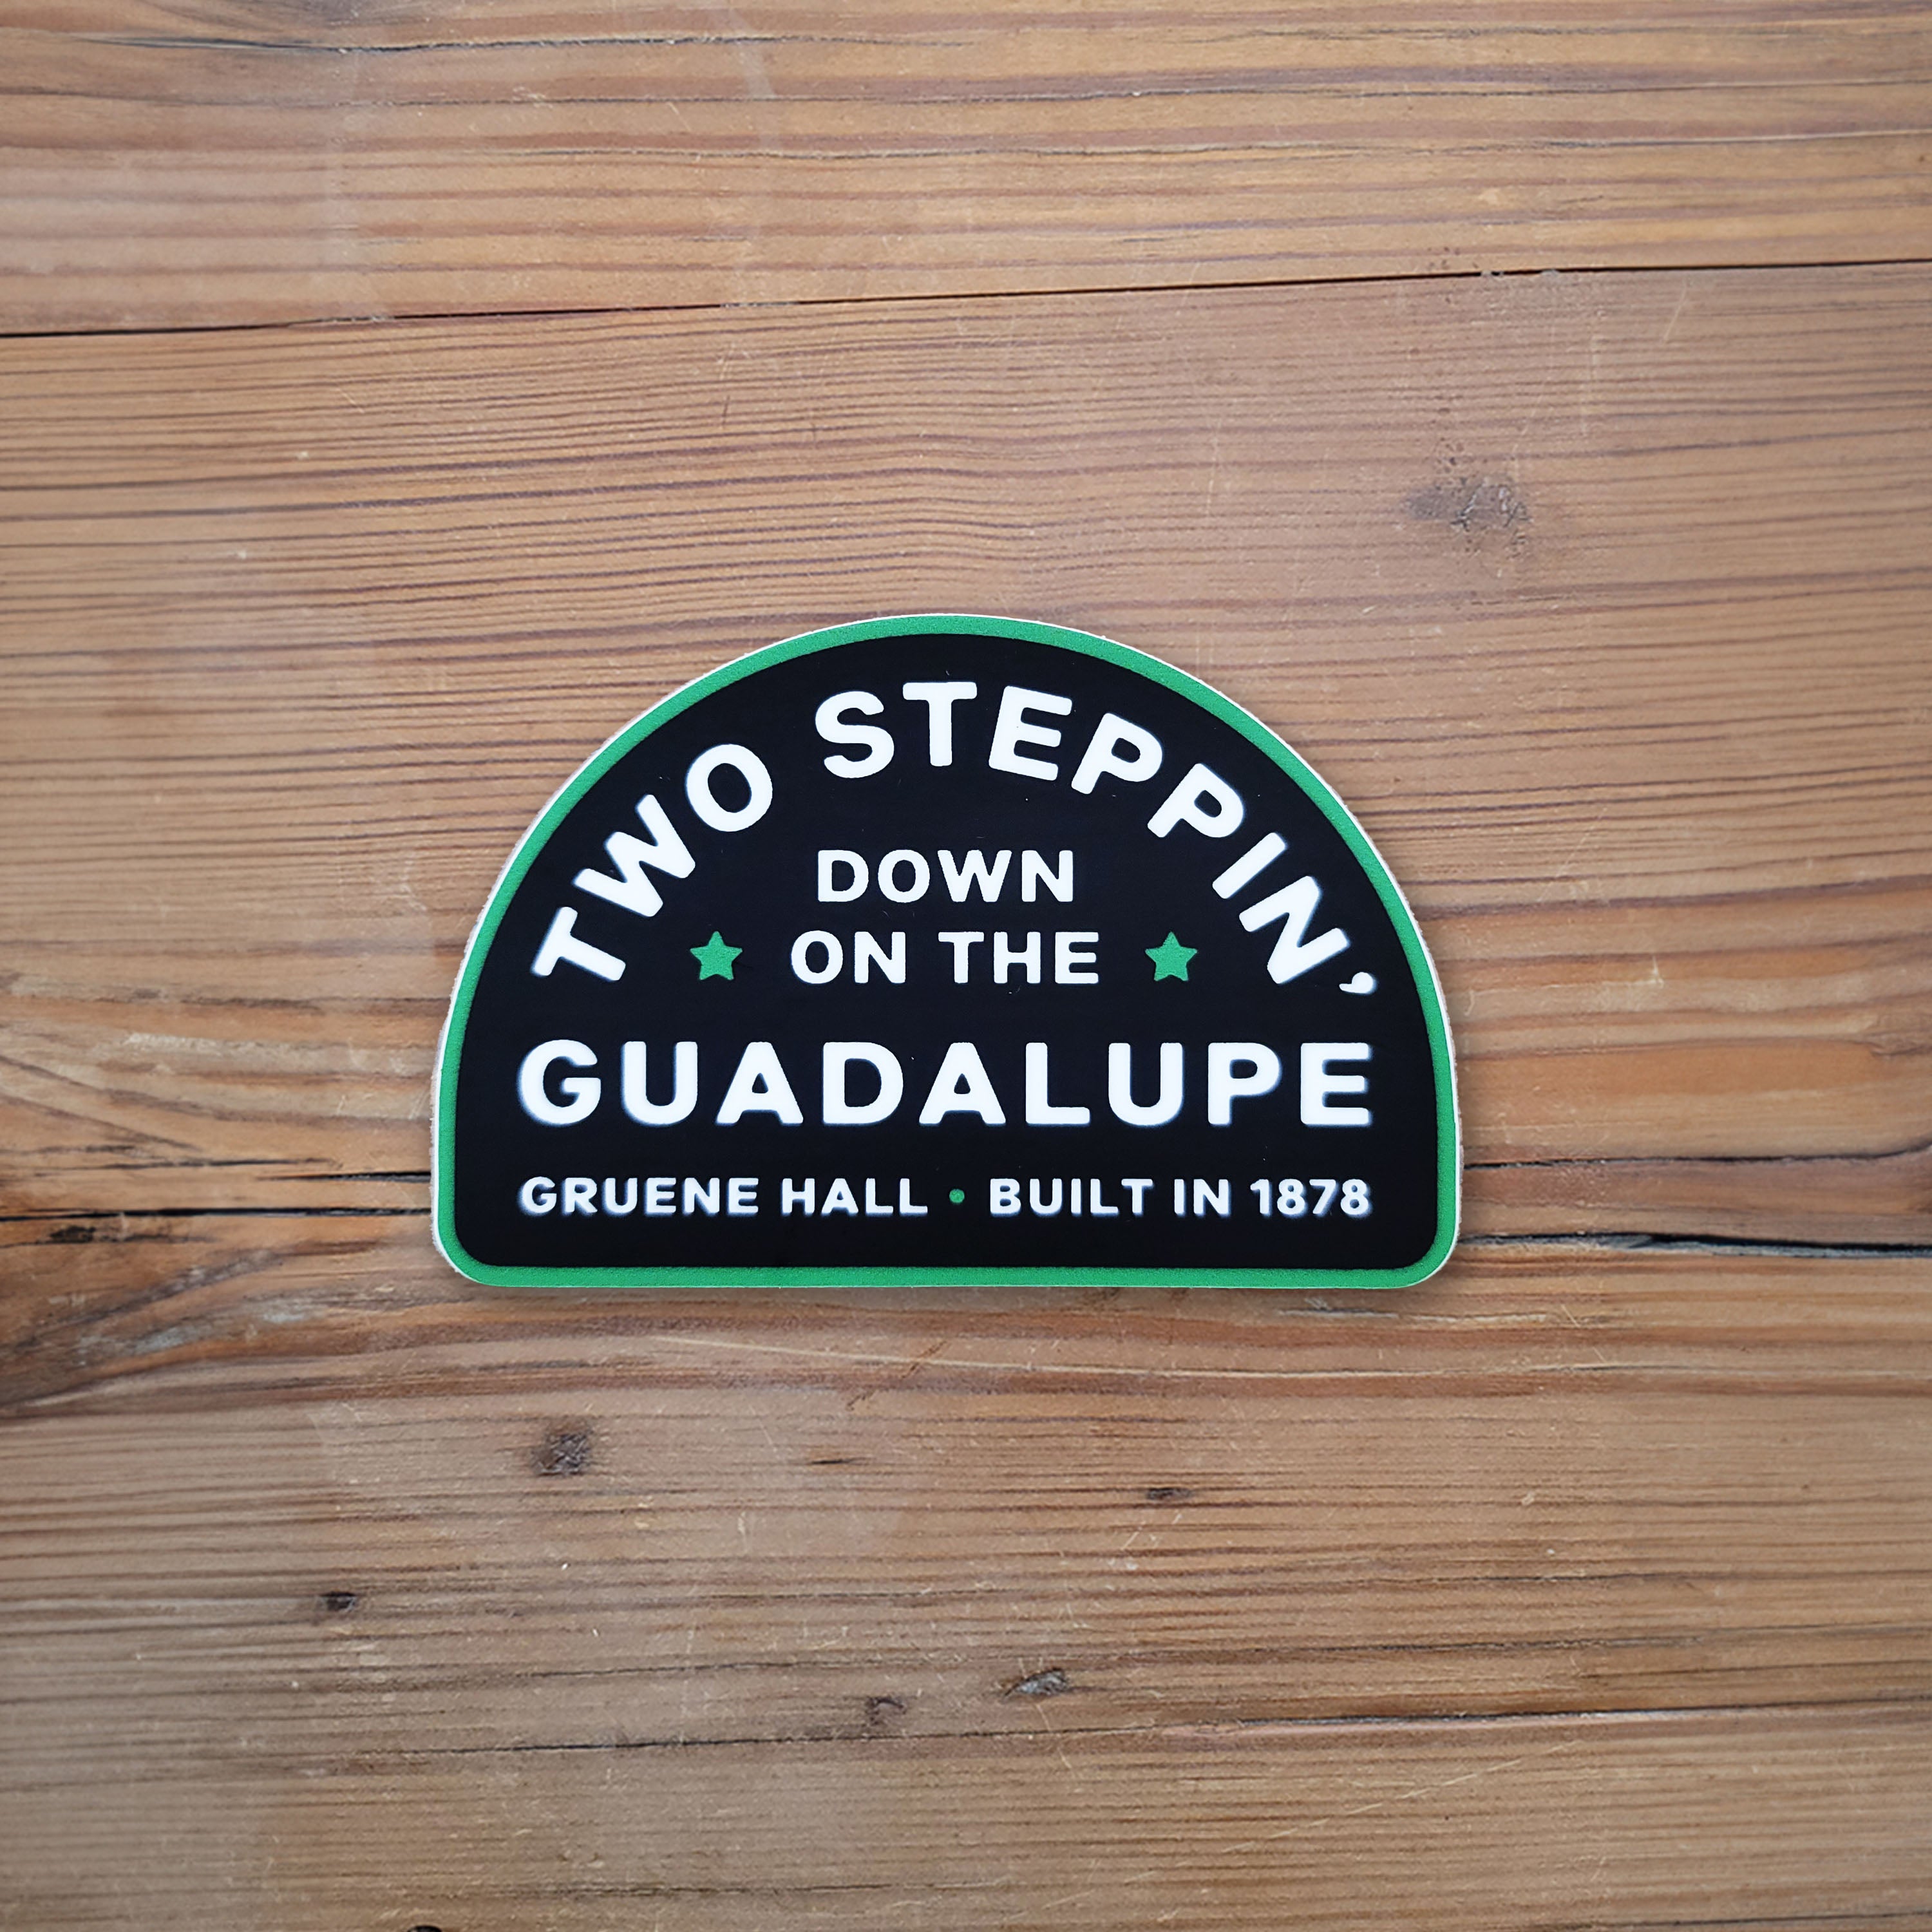 Gruene Hall Two-Steppin' on the Guadalupe Sticker